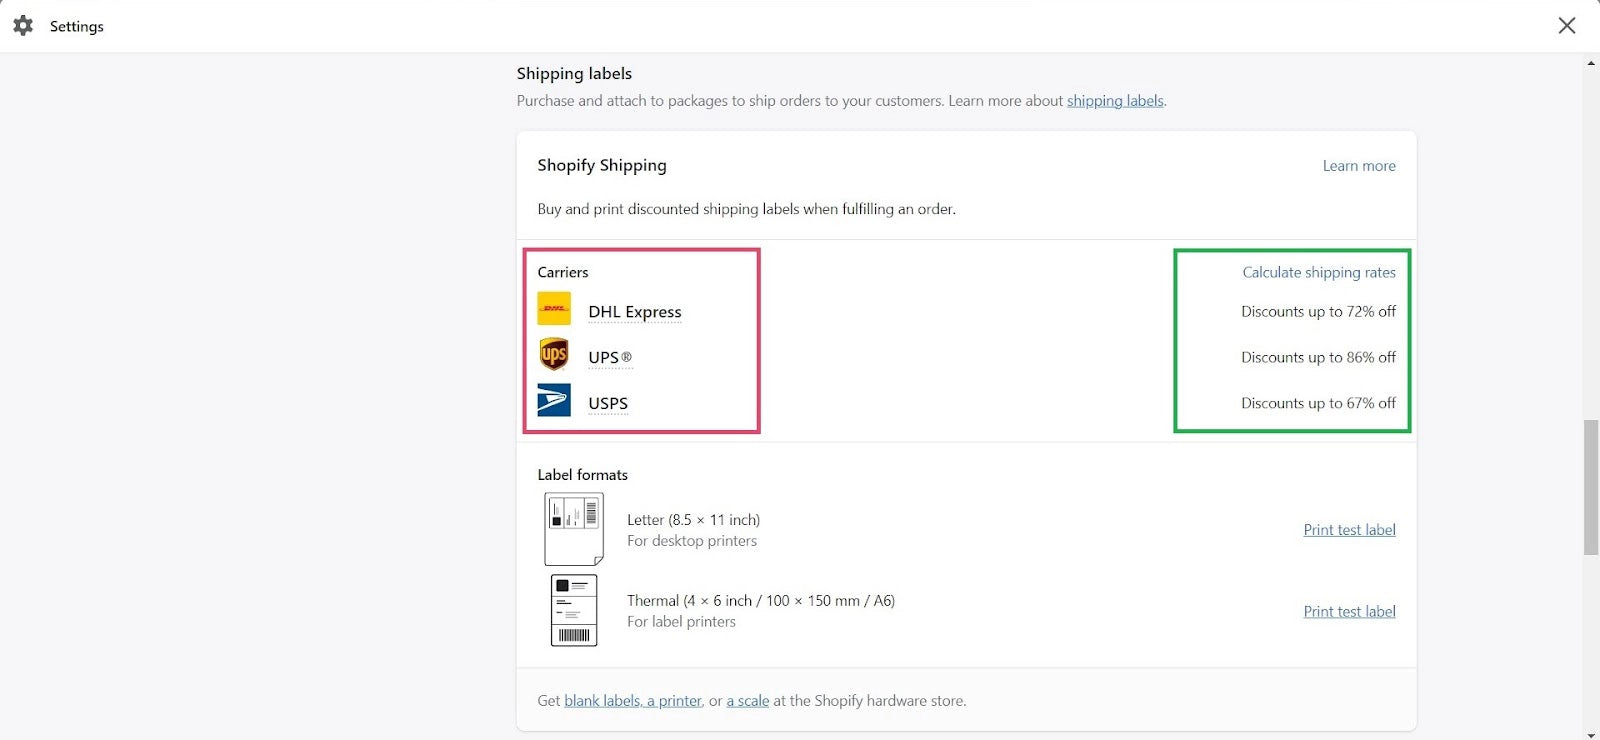 Shopify settings - Shipping labels